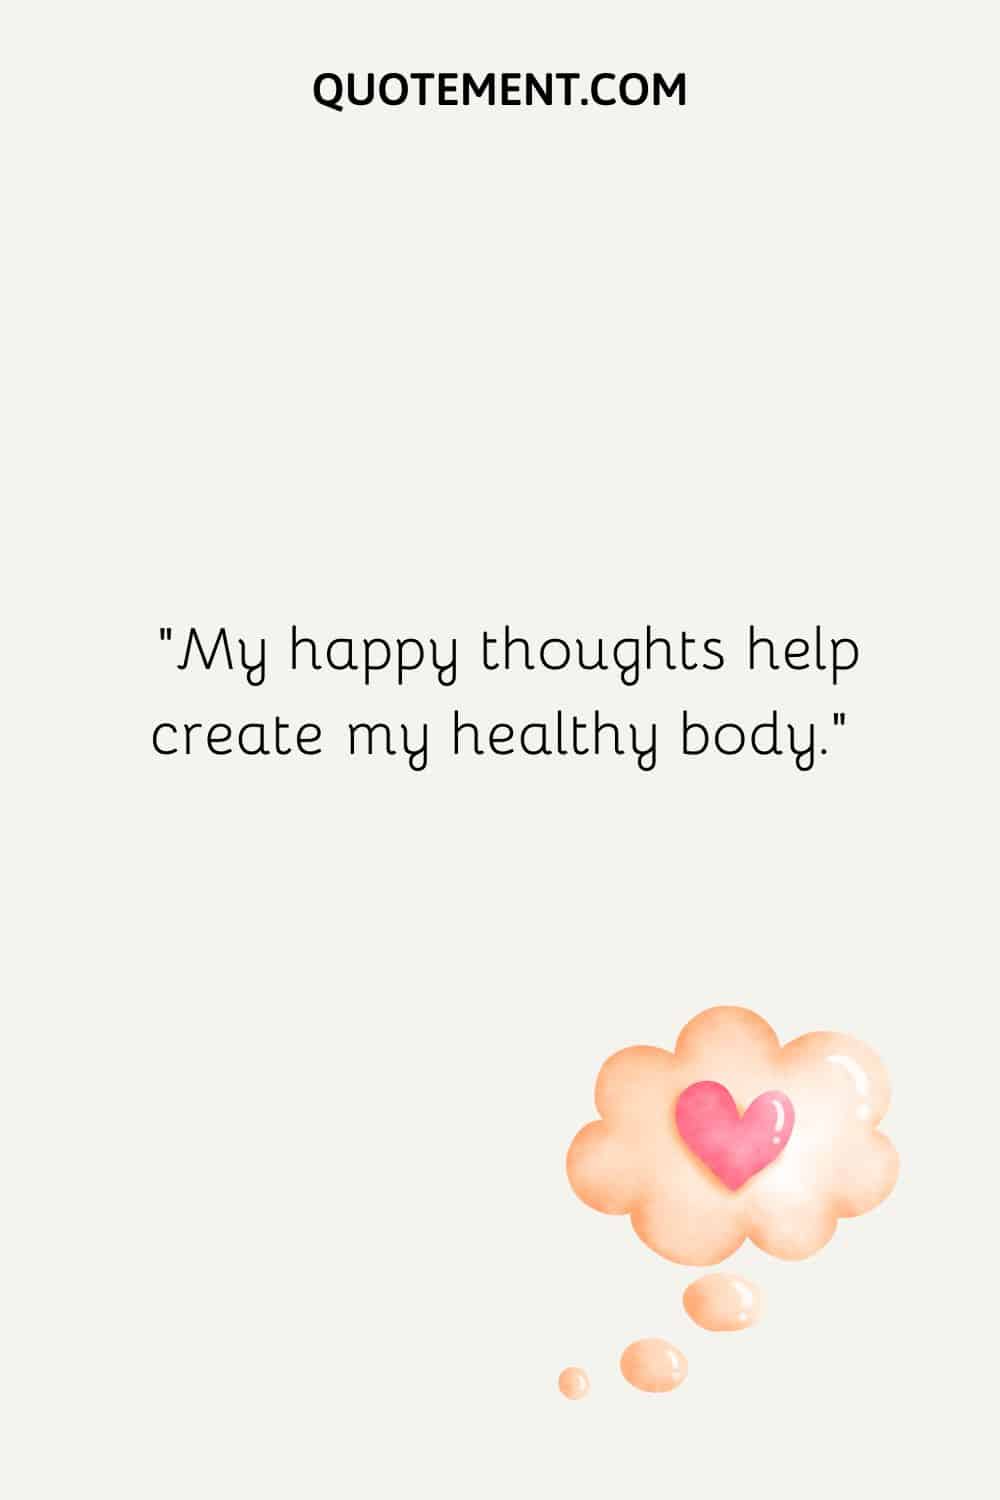 My happy thoughts help create my healthy body